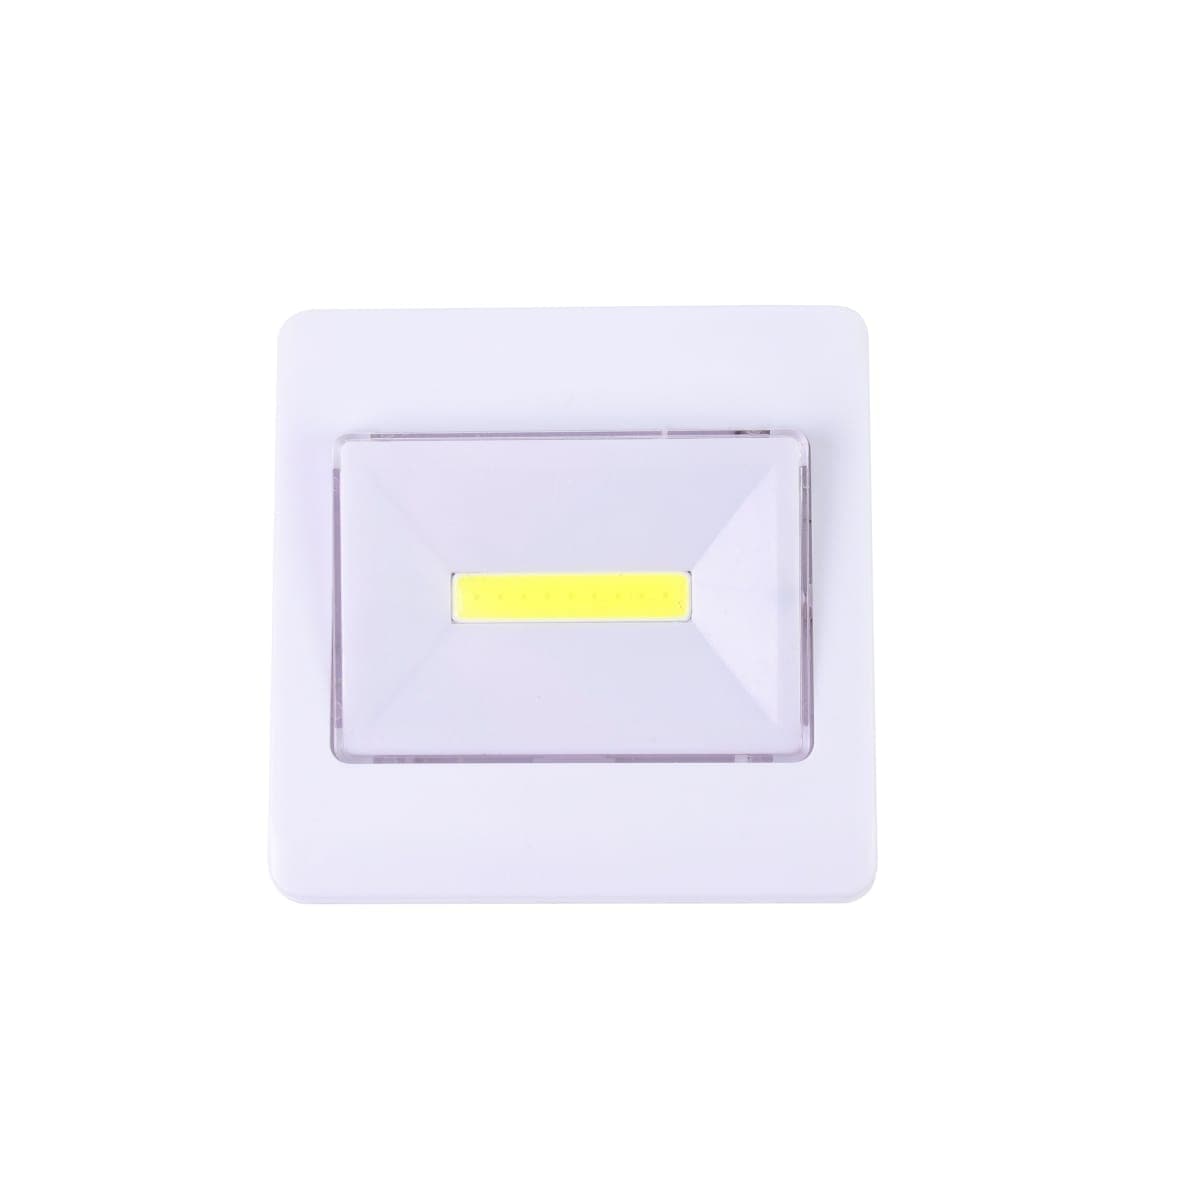 WHITE PLASTIC GIFT LIGHT 8.5 CM LED 1.3W COLD LIGHT WITH BATTERY AND SWITCH - best price from Maltashopper.com BR420005636